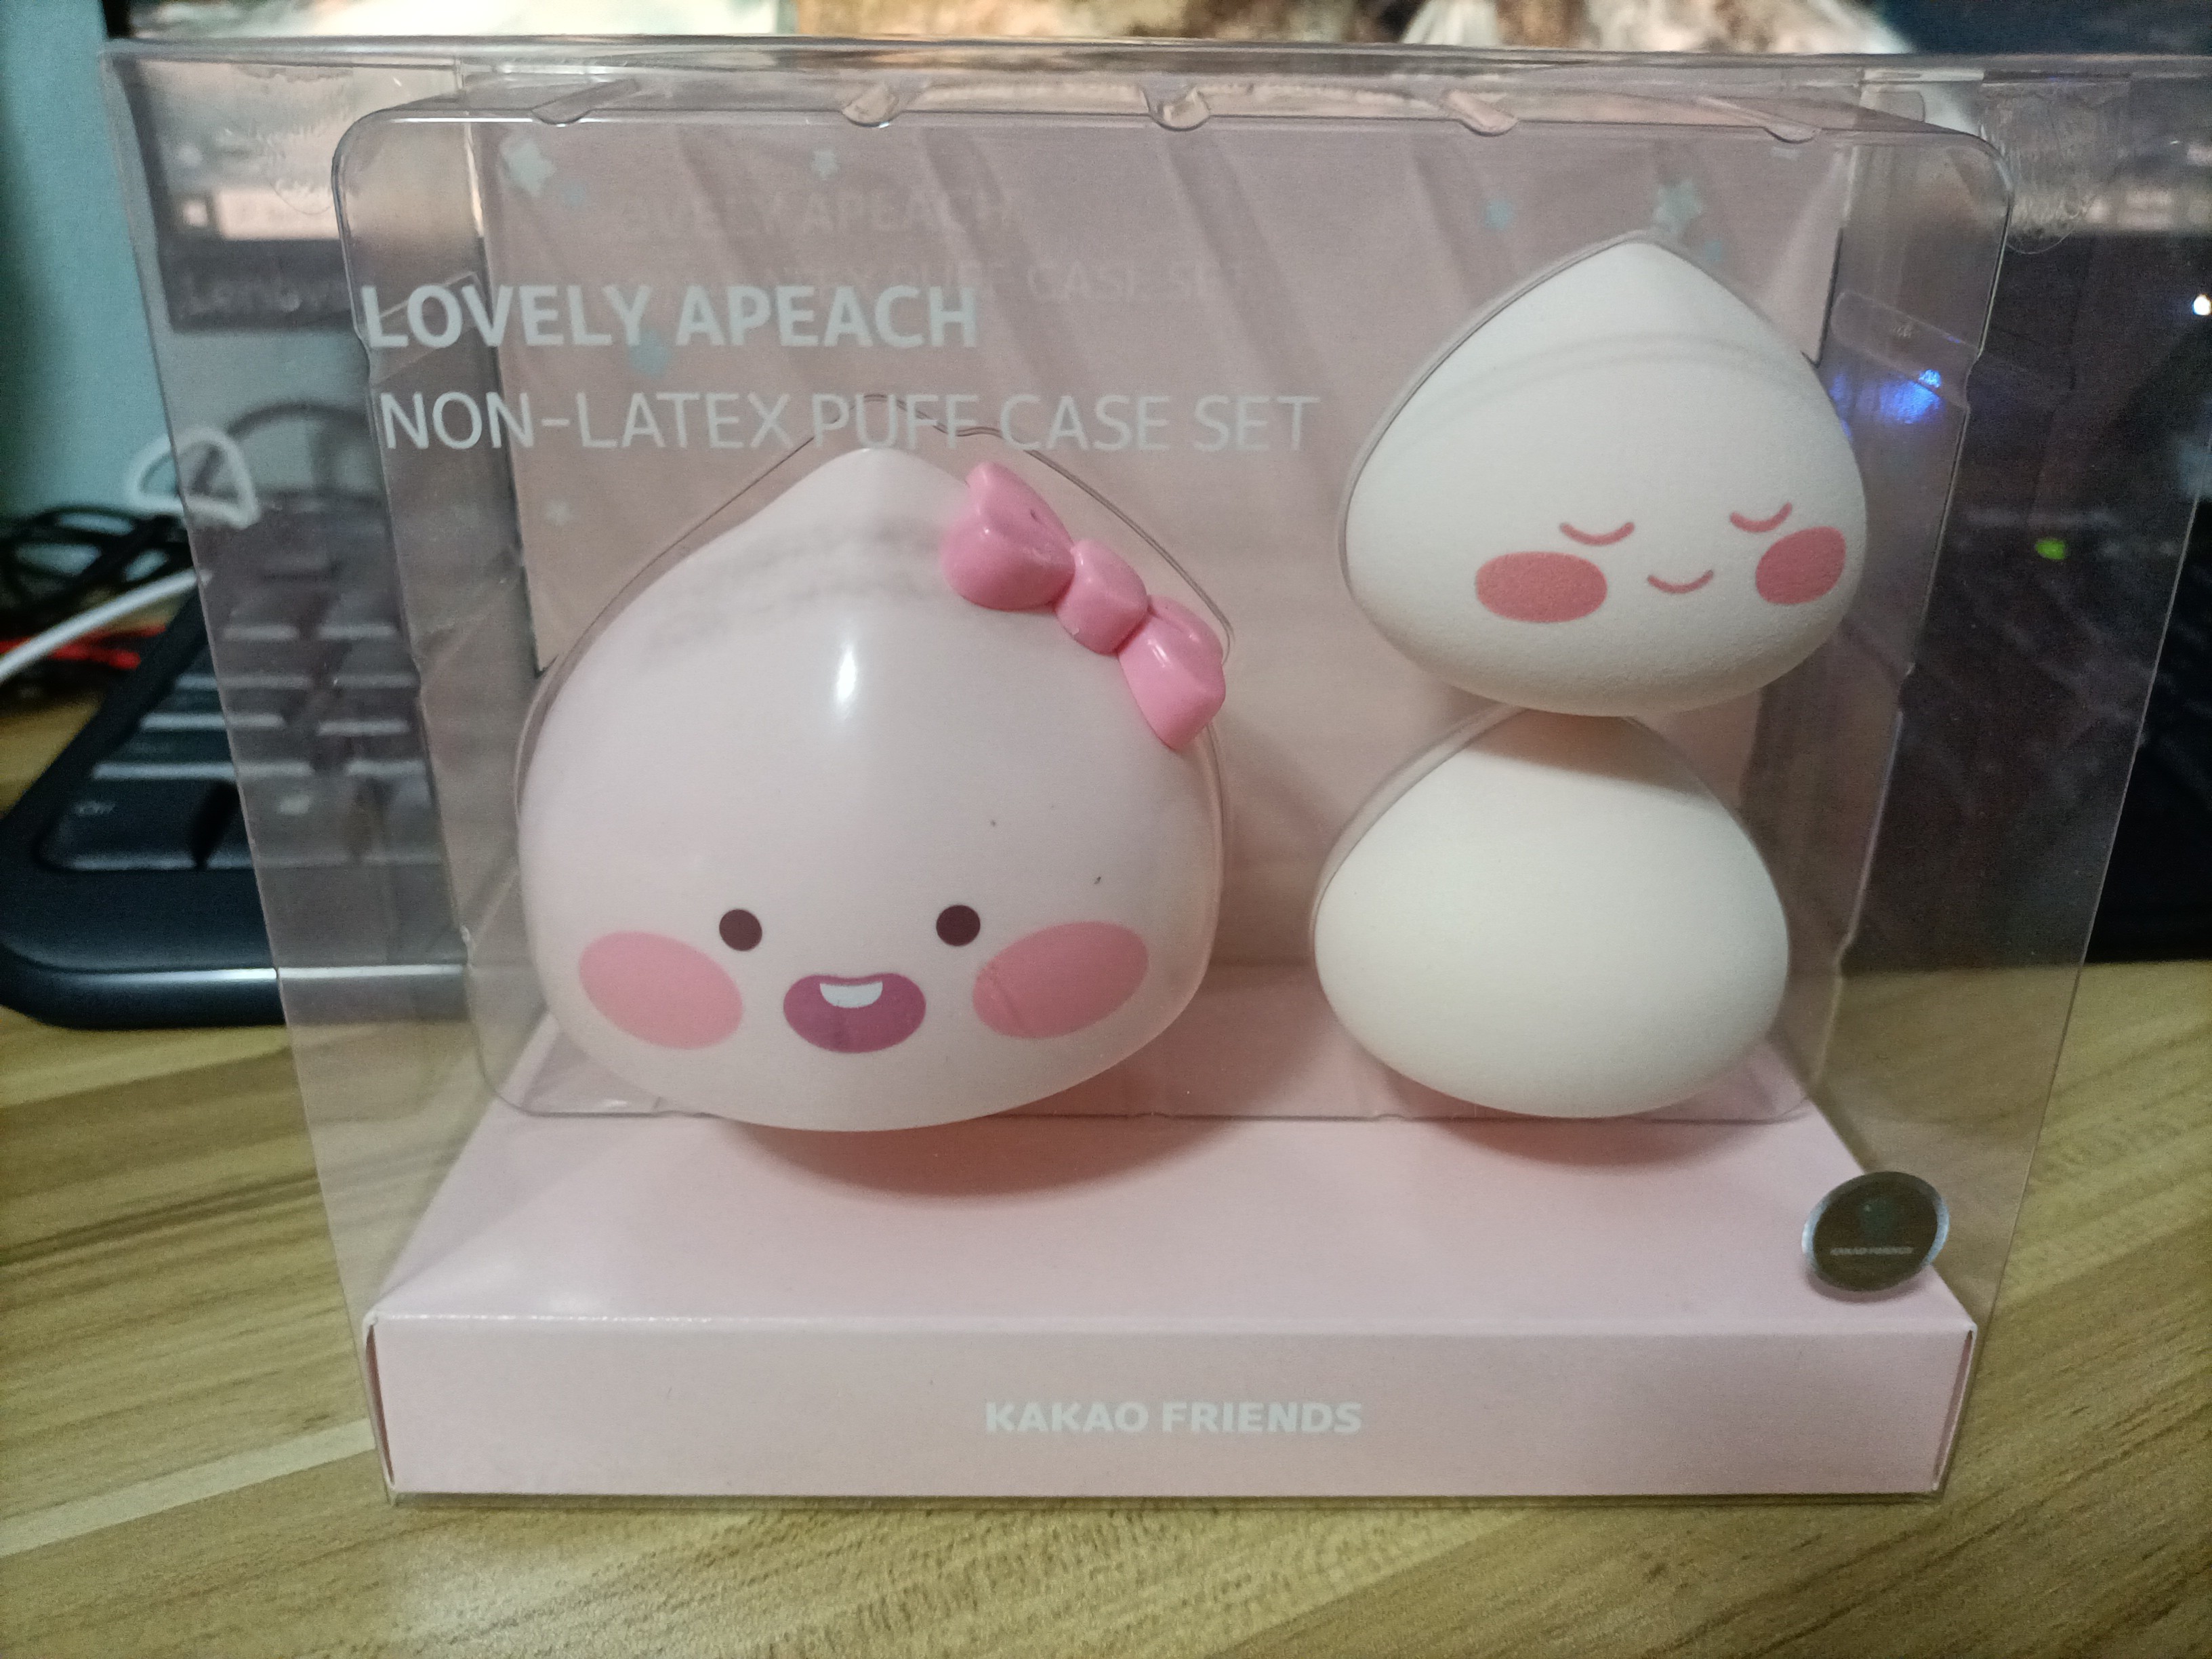 Kakao Friends Apeach Puff Case Set Foc Letter Set Beauty And Personal Care Face Makeup On 8863